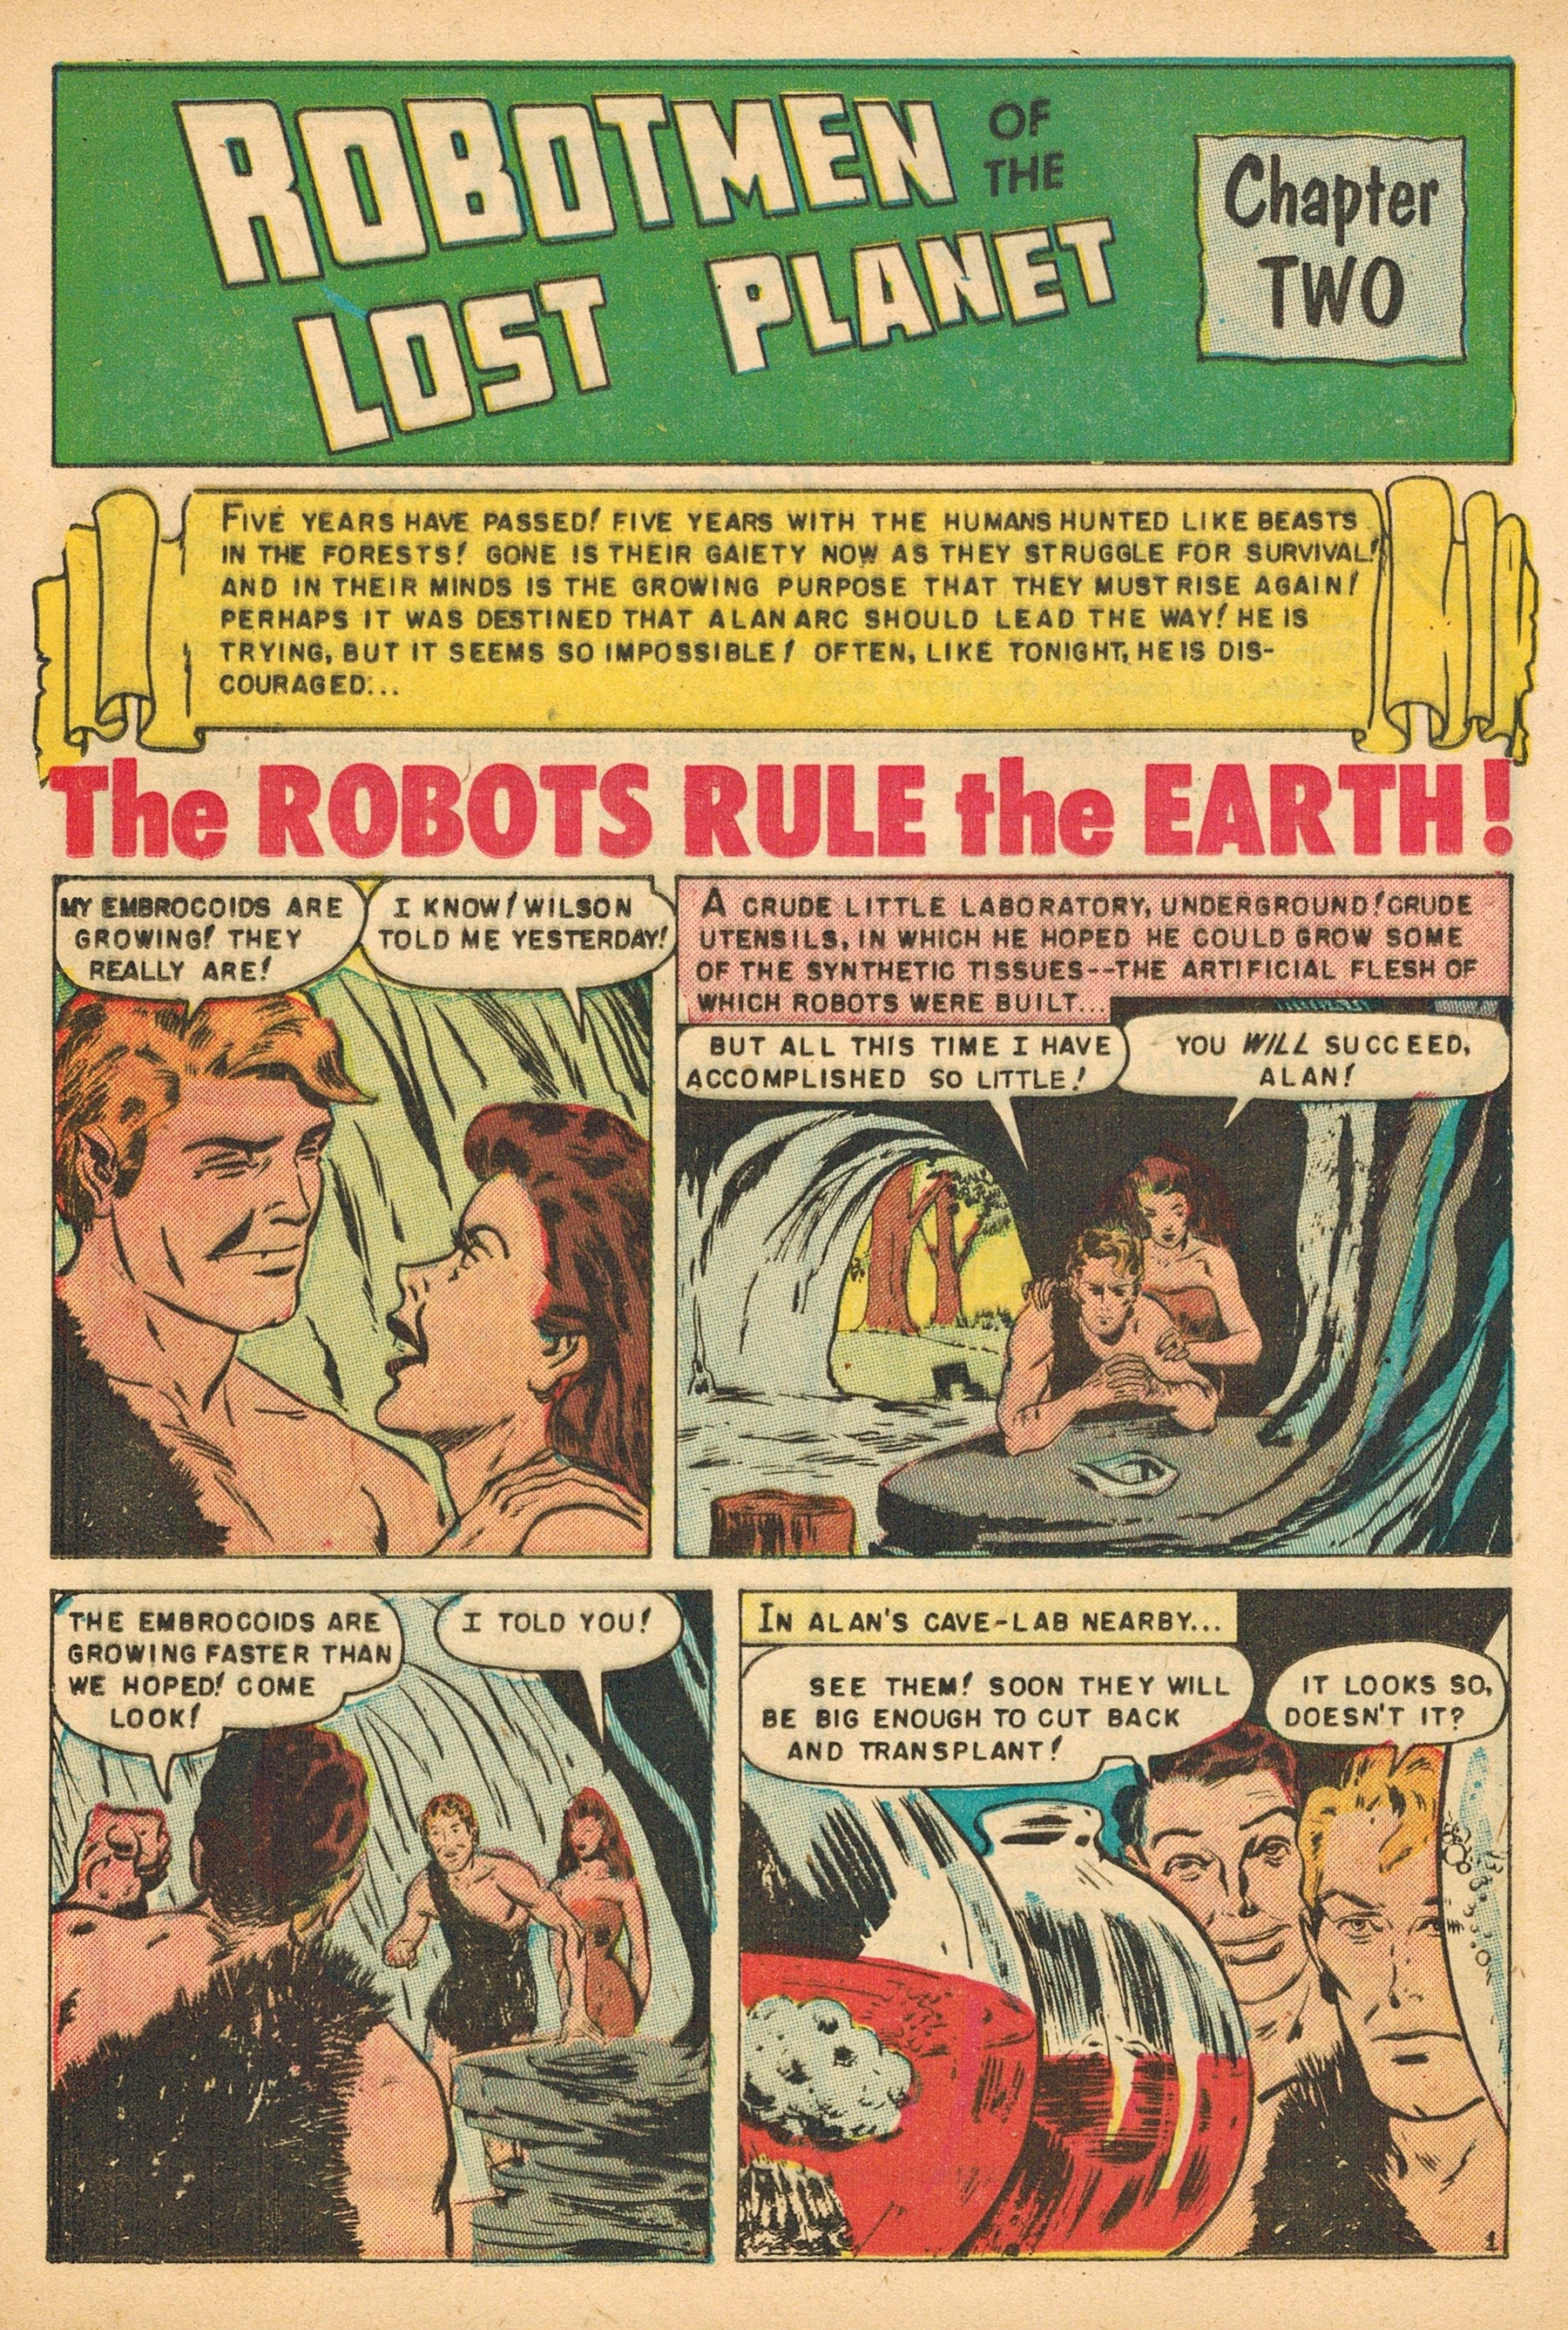 Read online Robotmen of the Lost Planet comic -  Issue # Full - 12